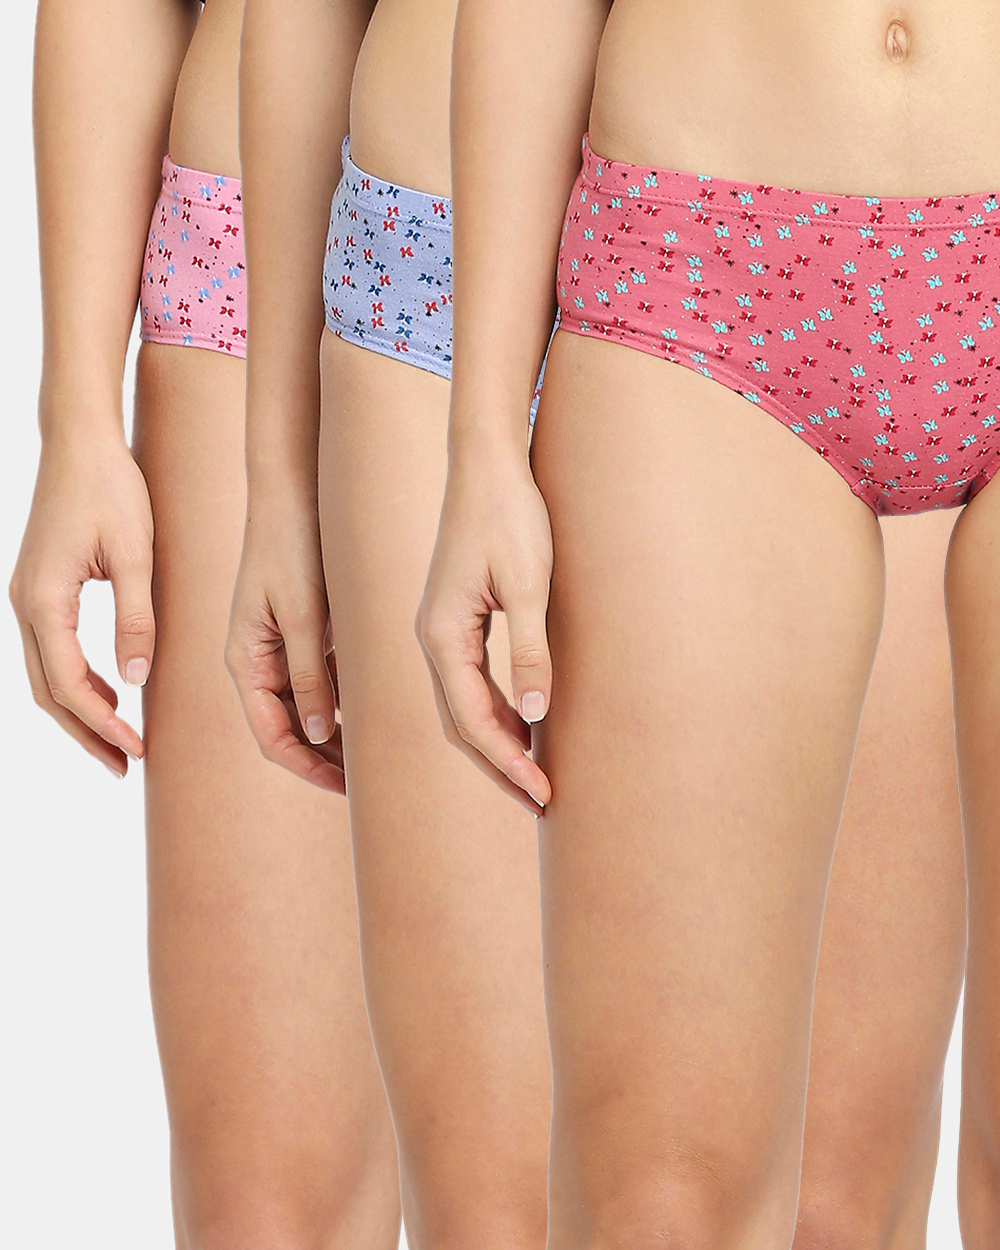 Red Rose Panties Dora The Explorer Print - Pack of 3(Colour May Vary)